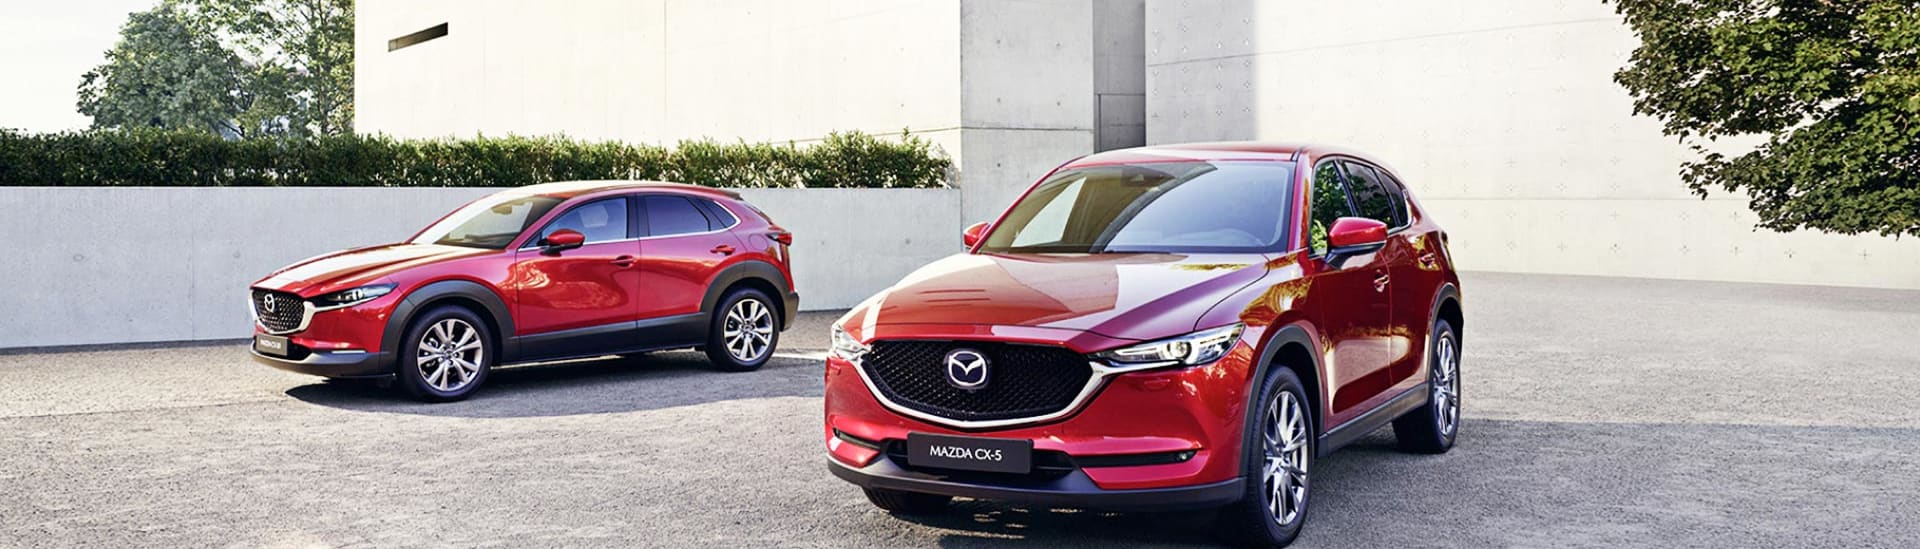 Mazda Approved Used Cars